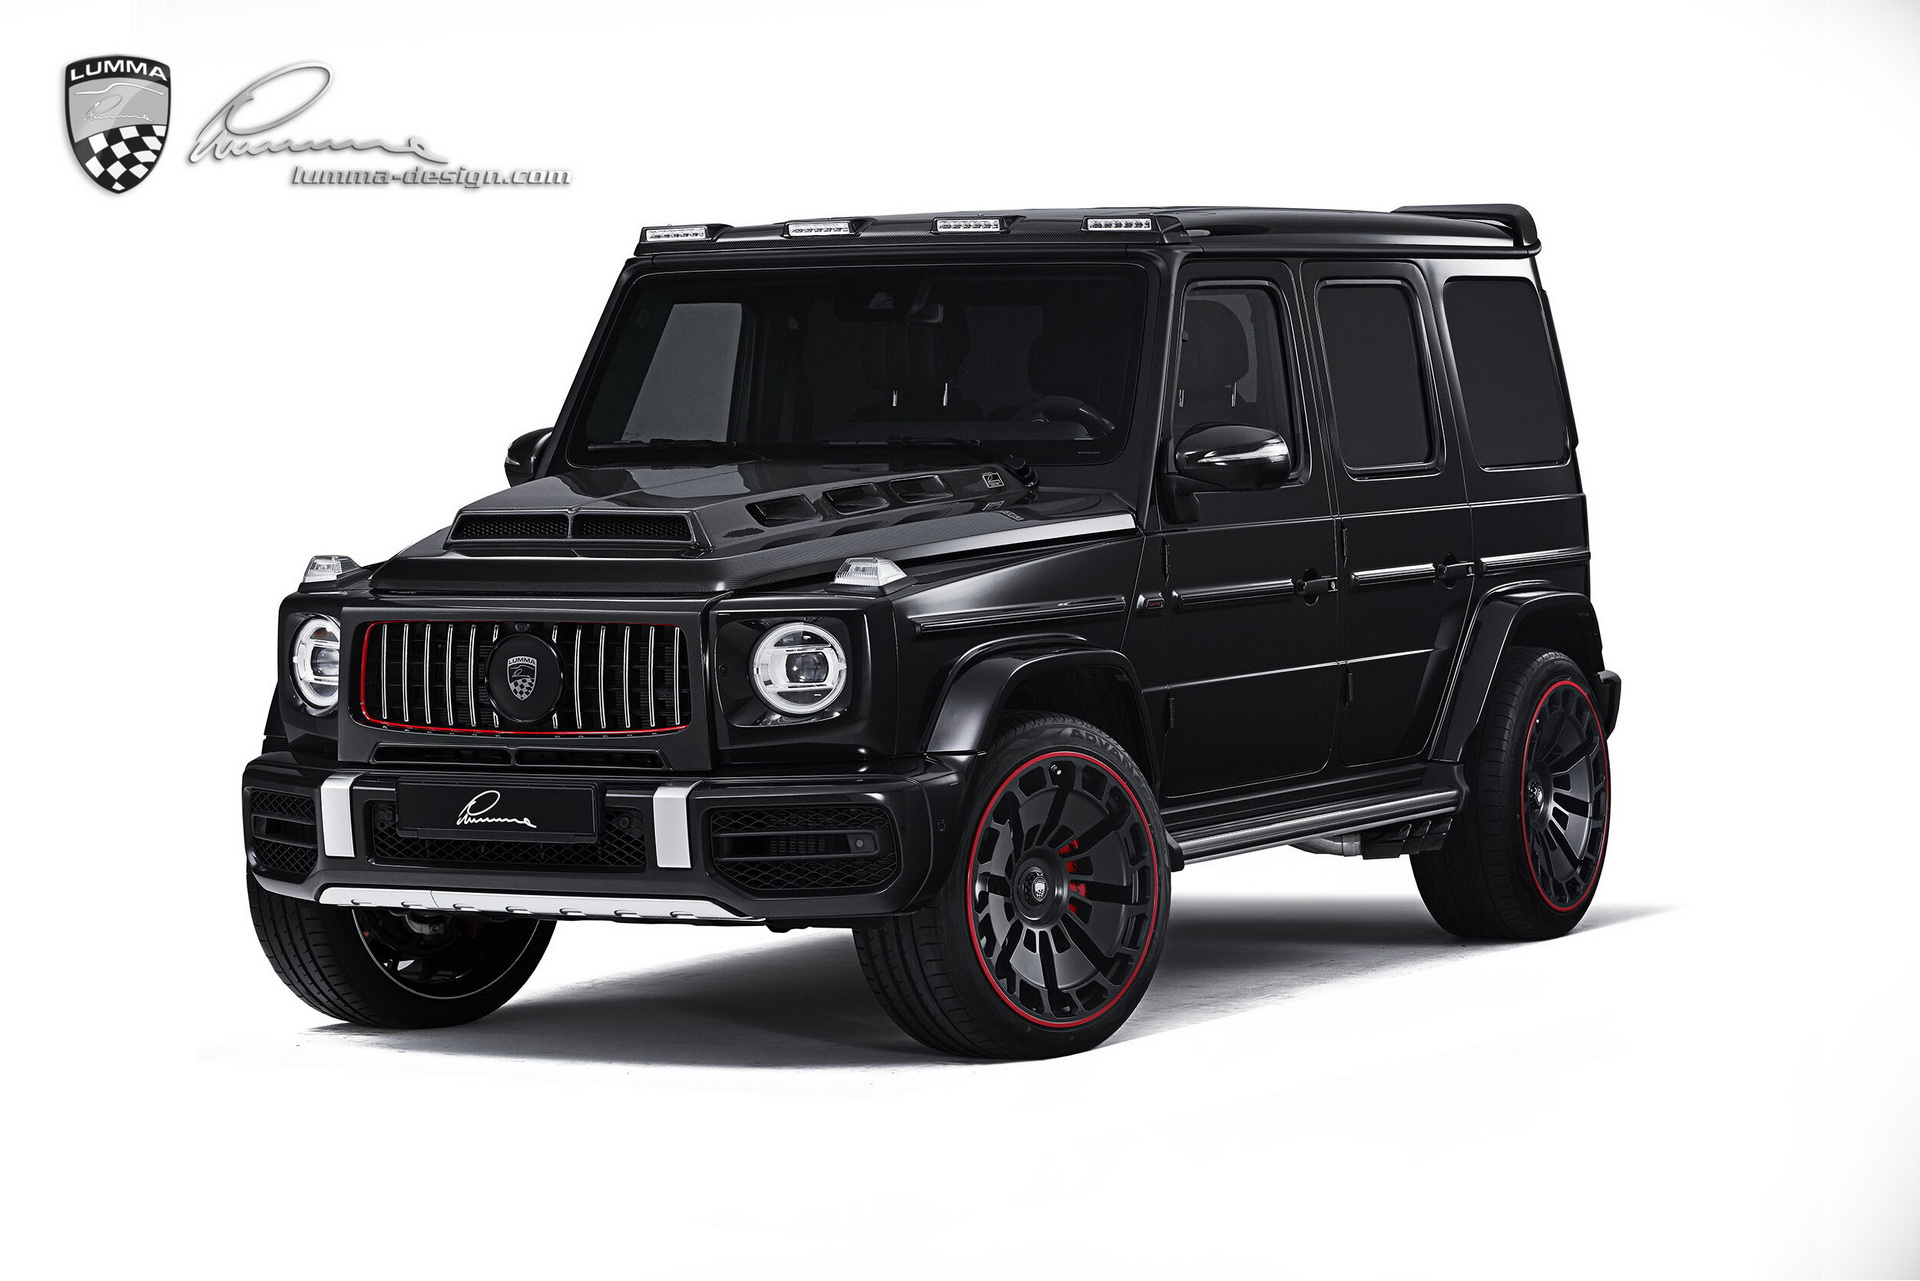 Mercedes Amg G63 Gets The Party Started With New Body Kit 641 Hp Carscoops